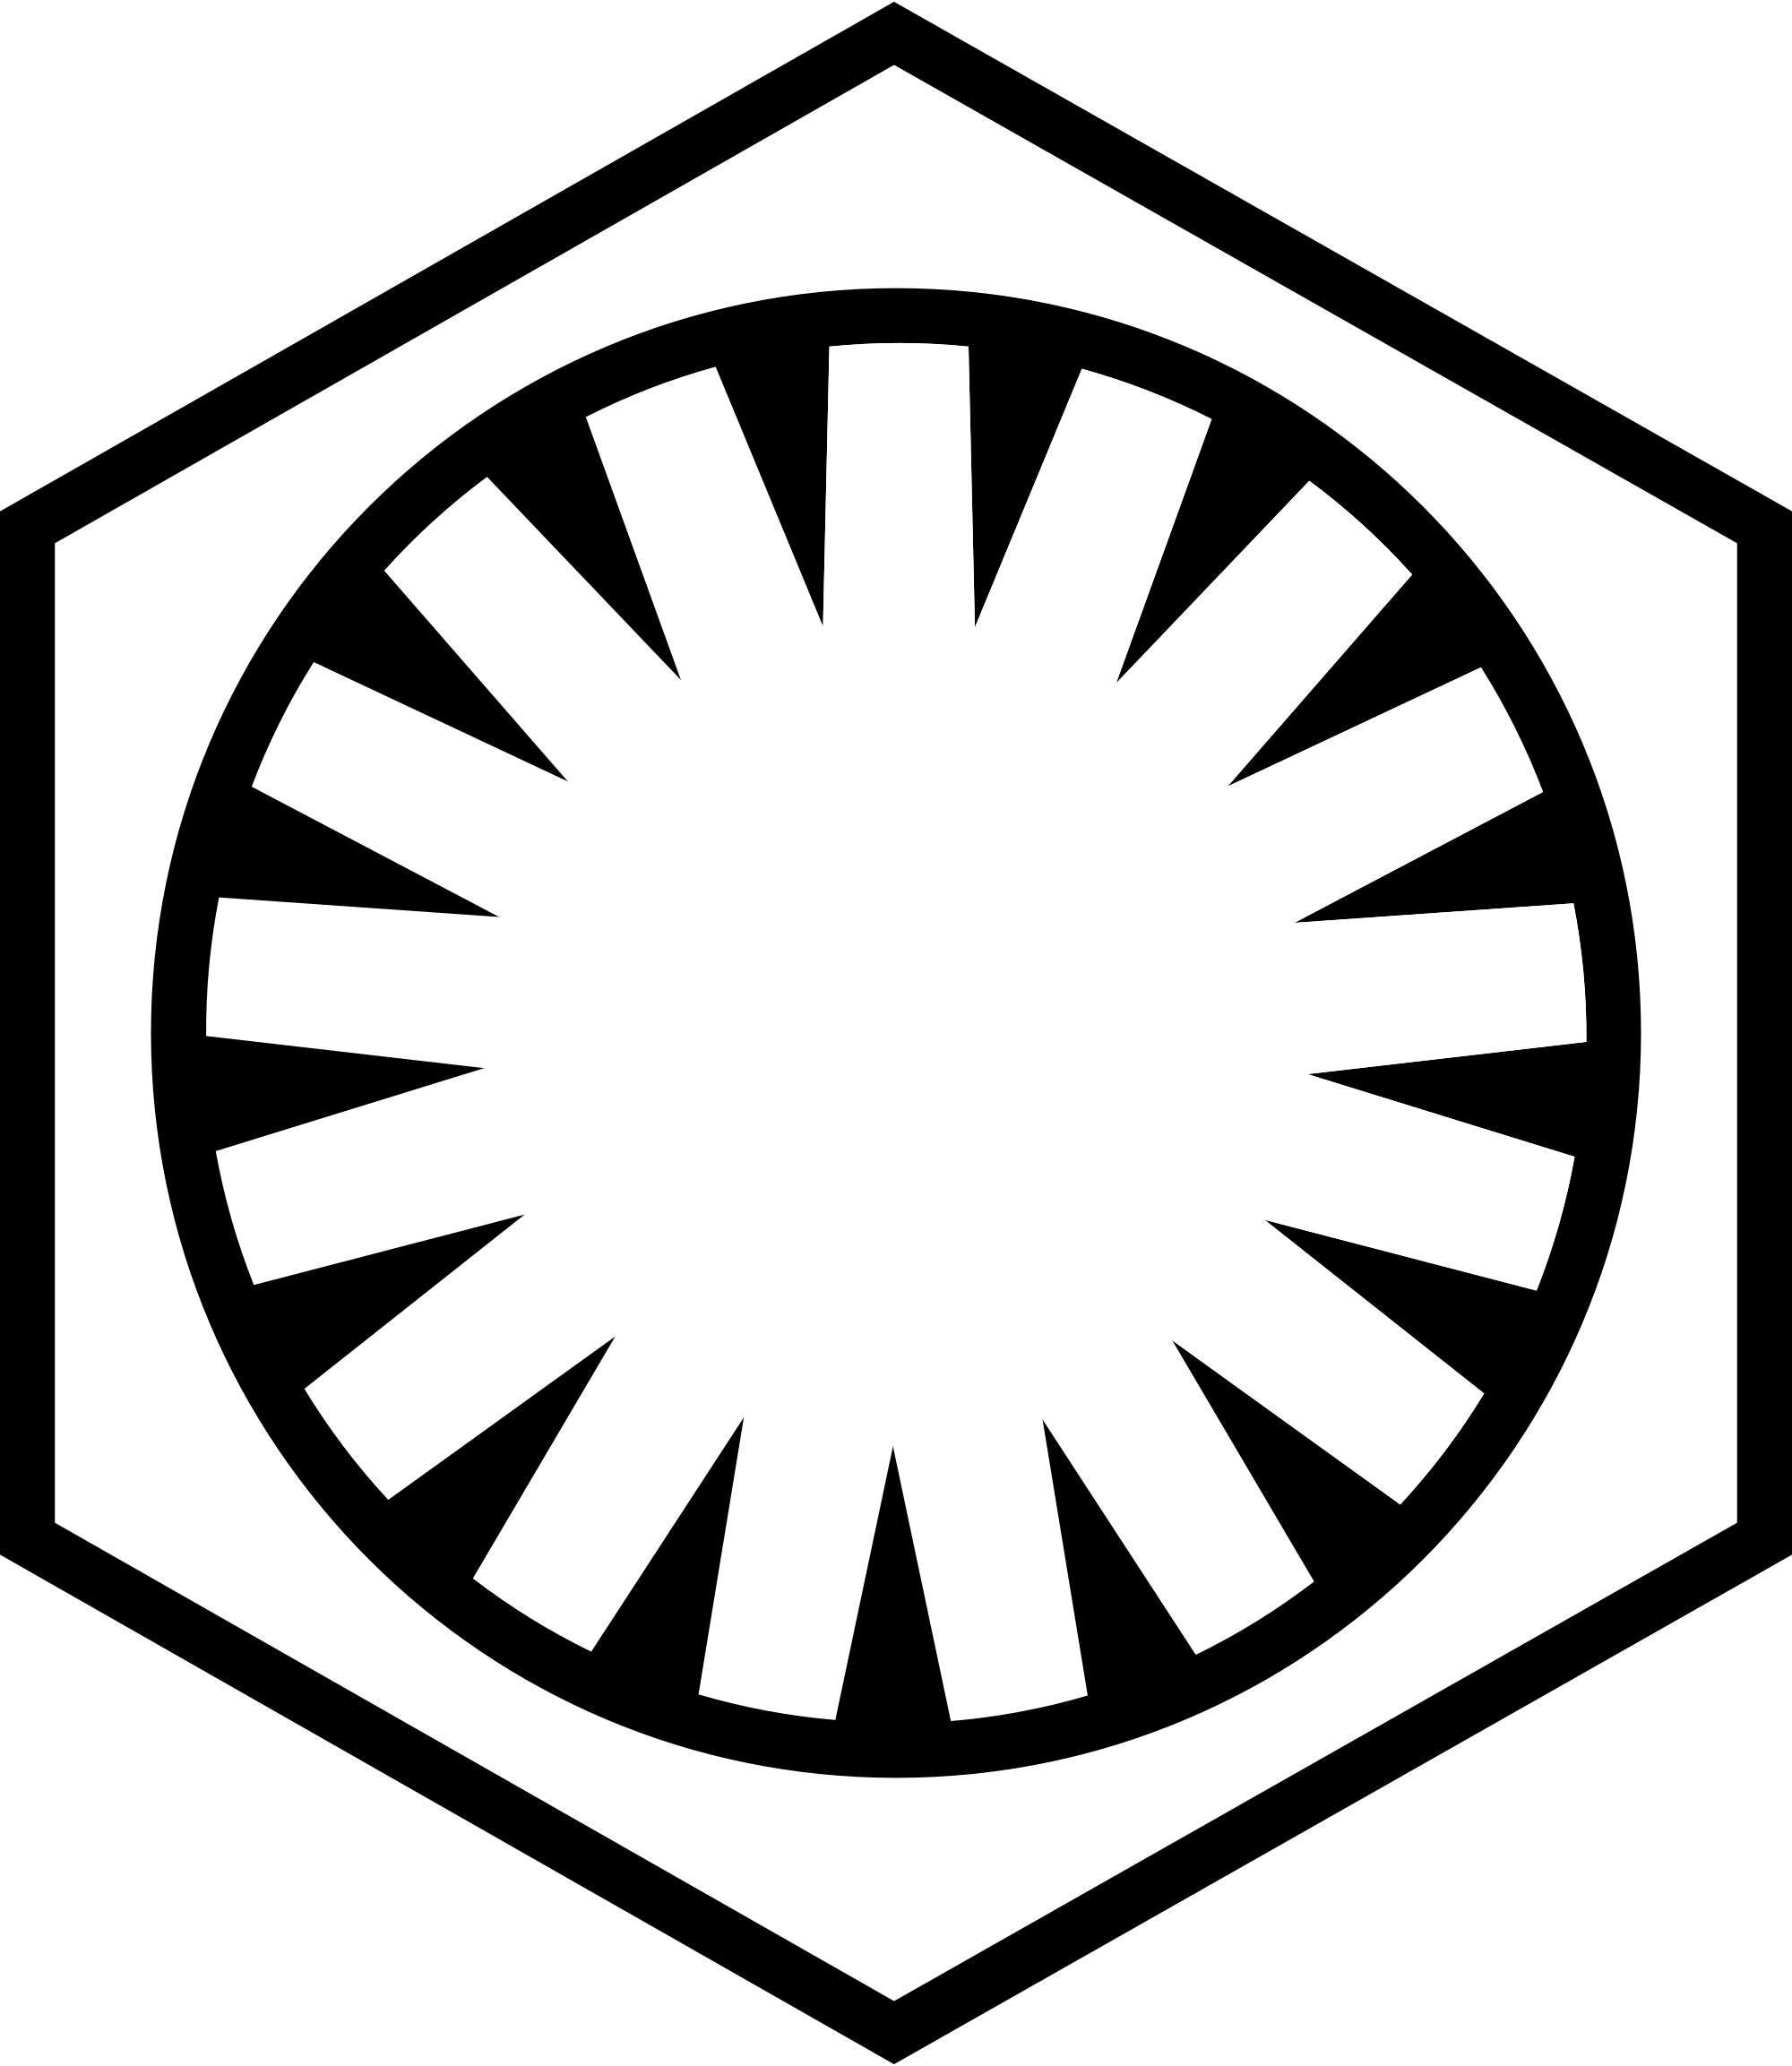 2000px-Emblem_of_the_First_Order.svg.png